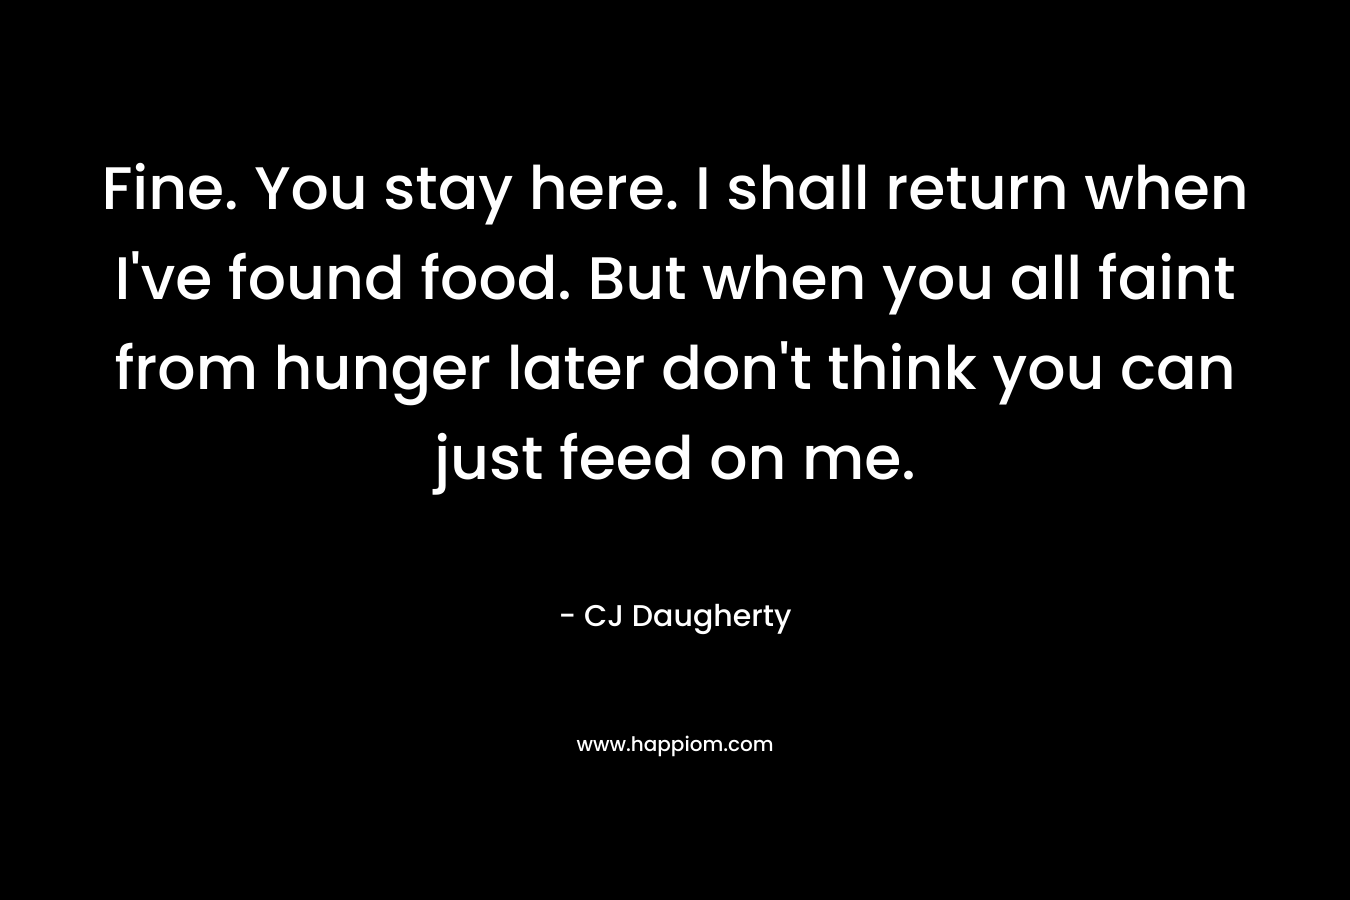 Fine. You stay here. I shall return when I’ve found food. But when you all faint from hunger later don’t think you can just feed on me. – CJ Daugherty